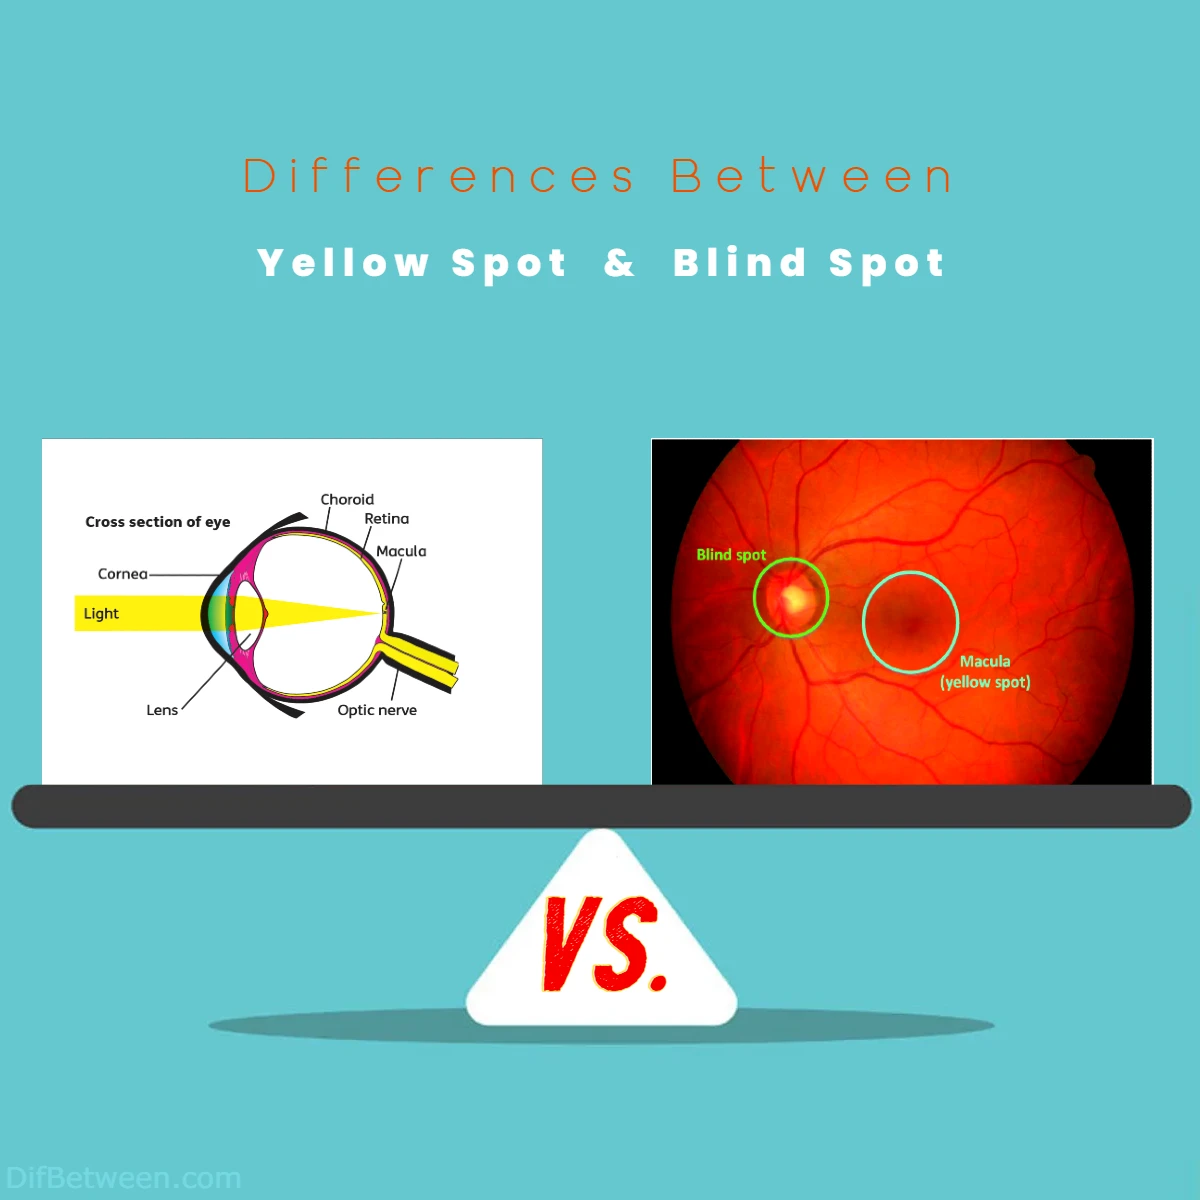 Differences Between Yellow Spot vs Blind Spot